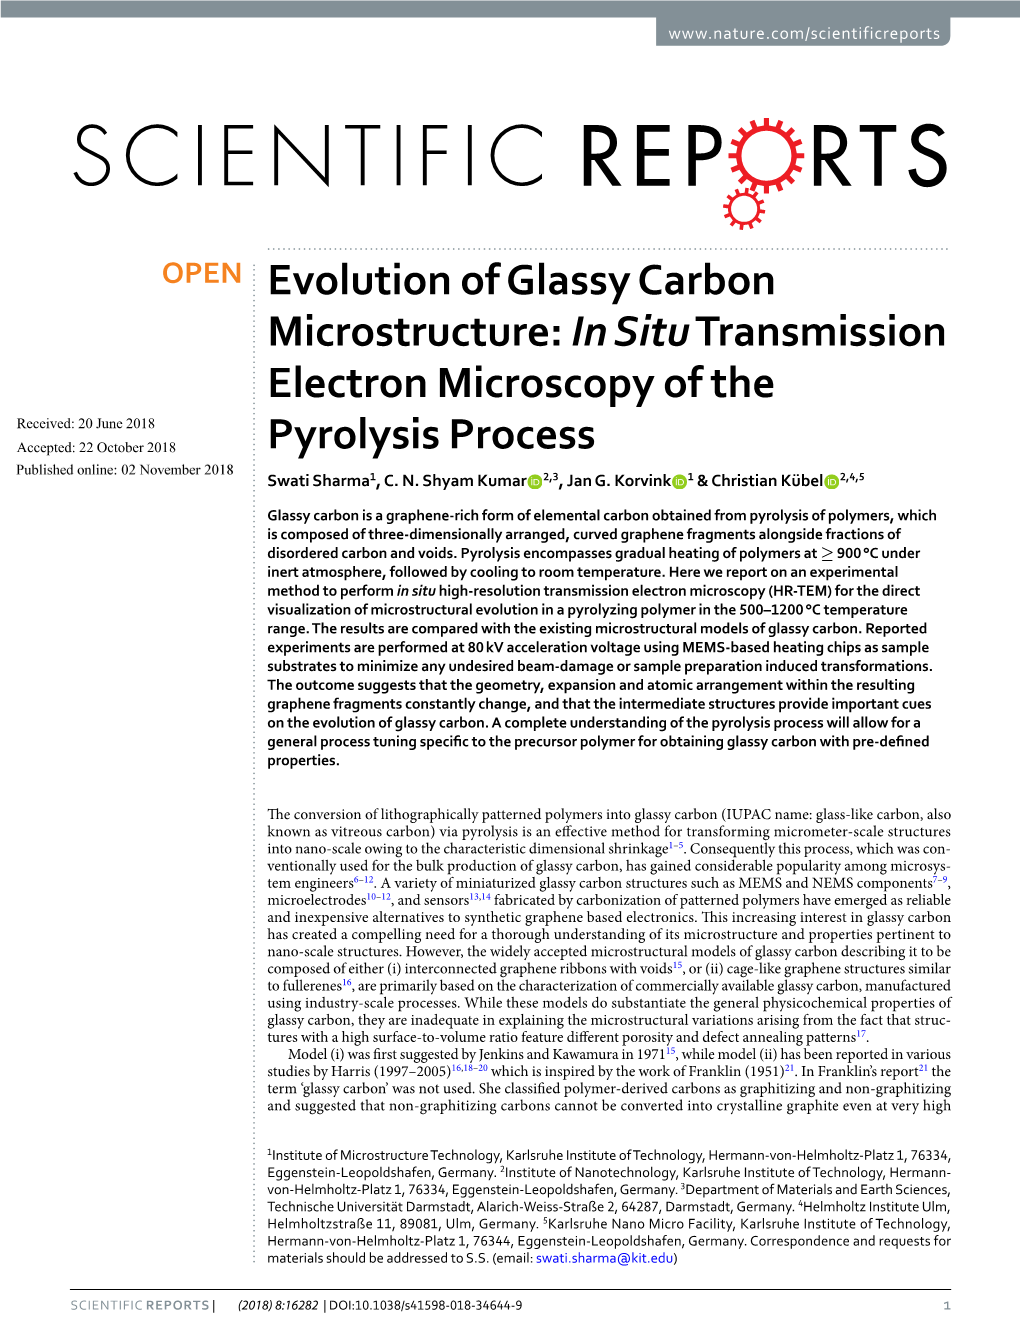 Evolution of Glassy Carbon Microstructure